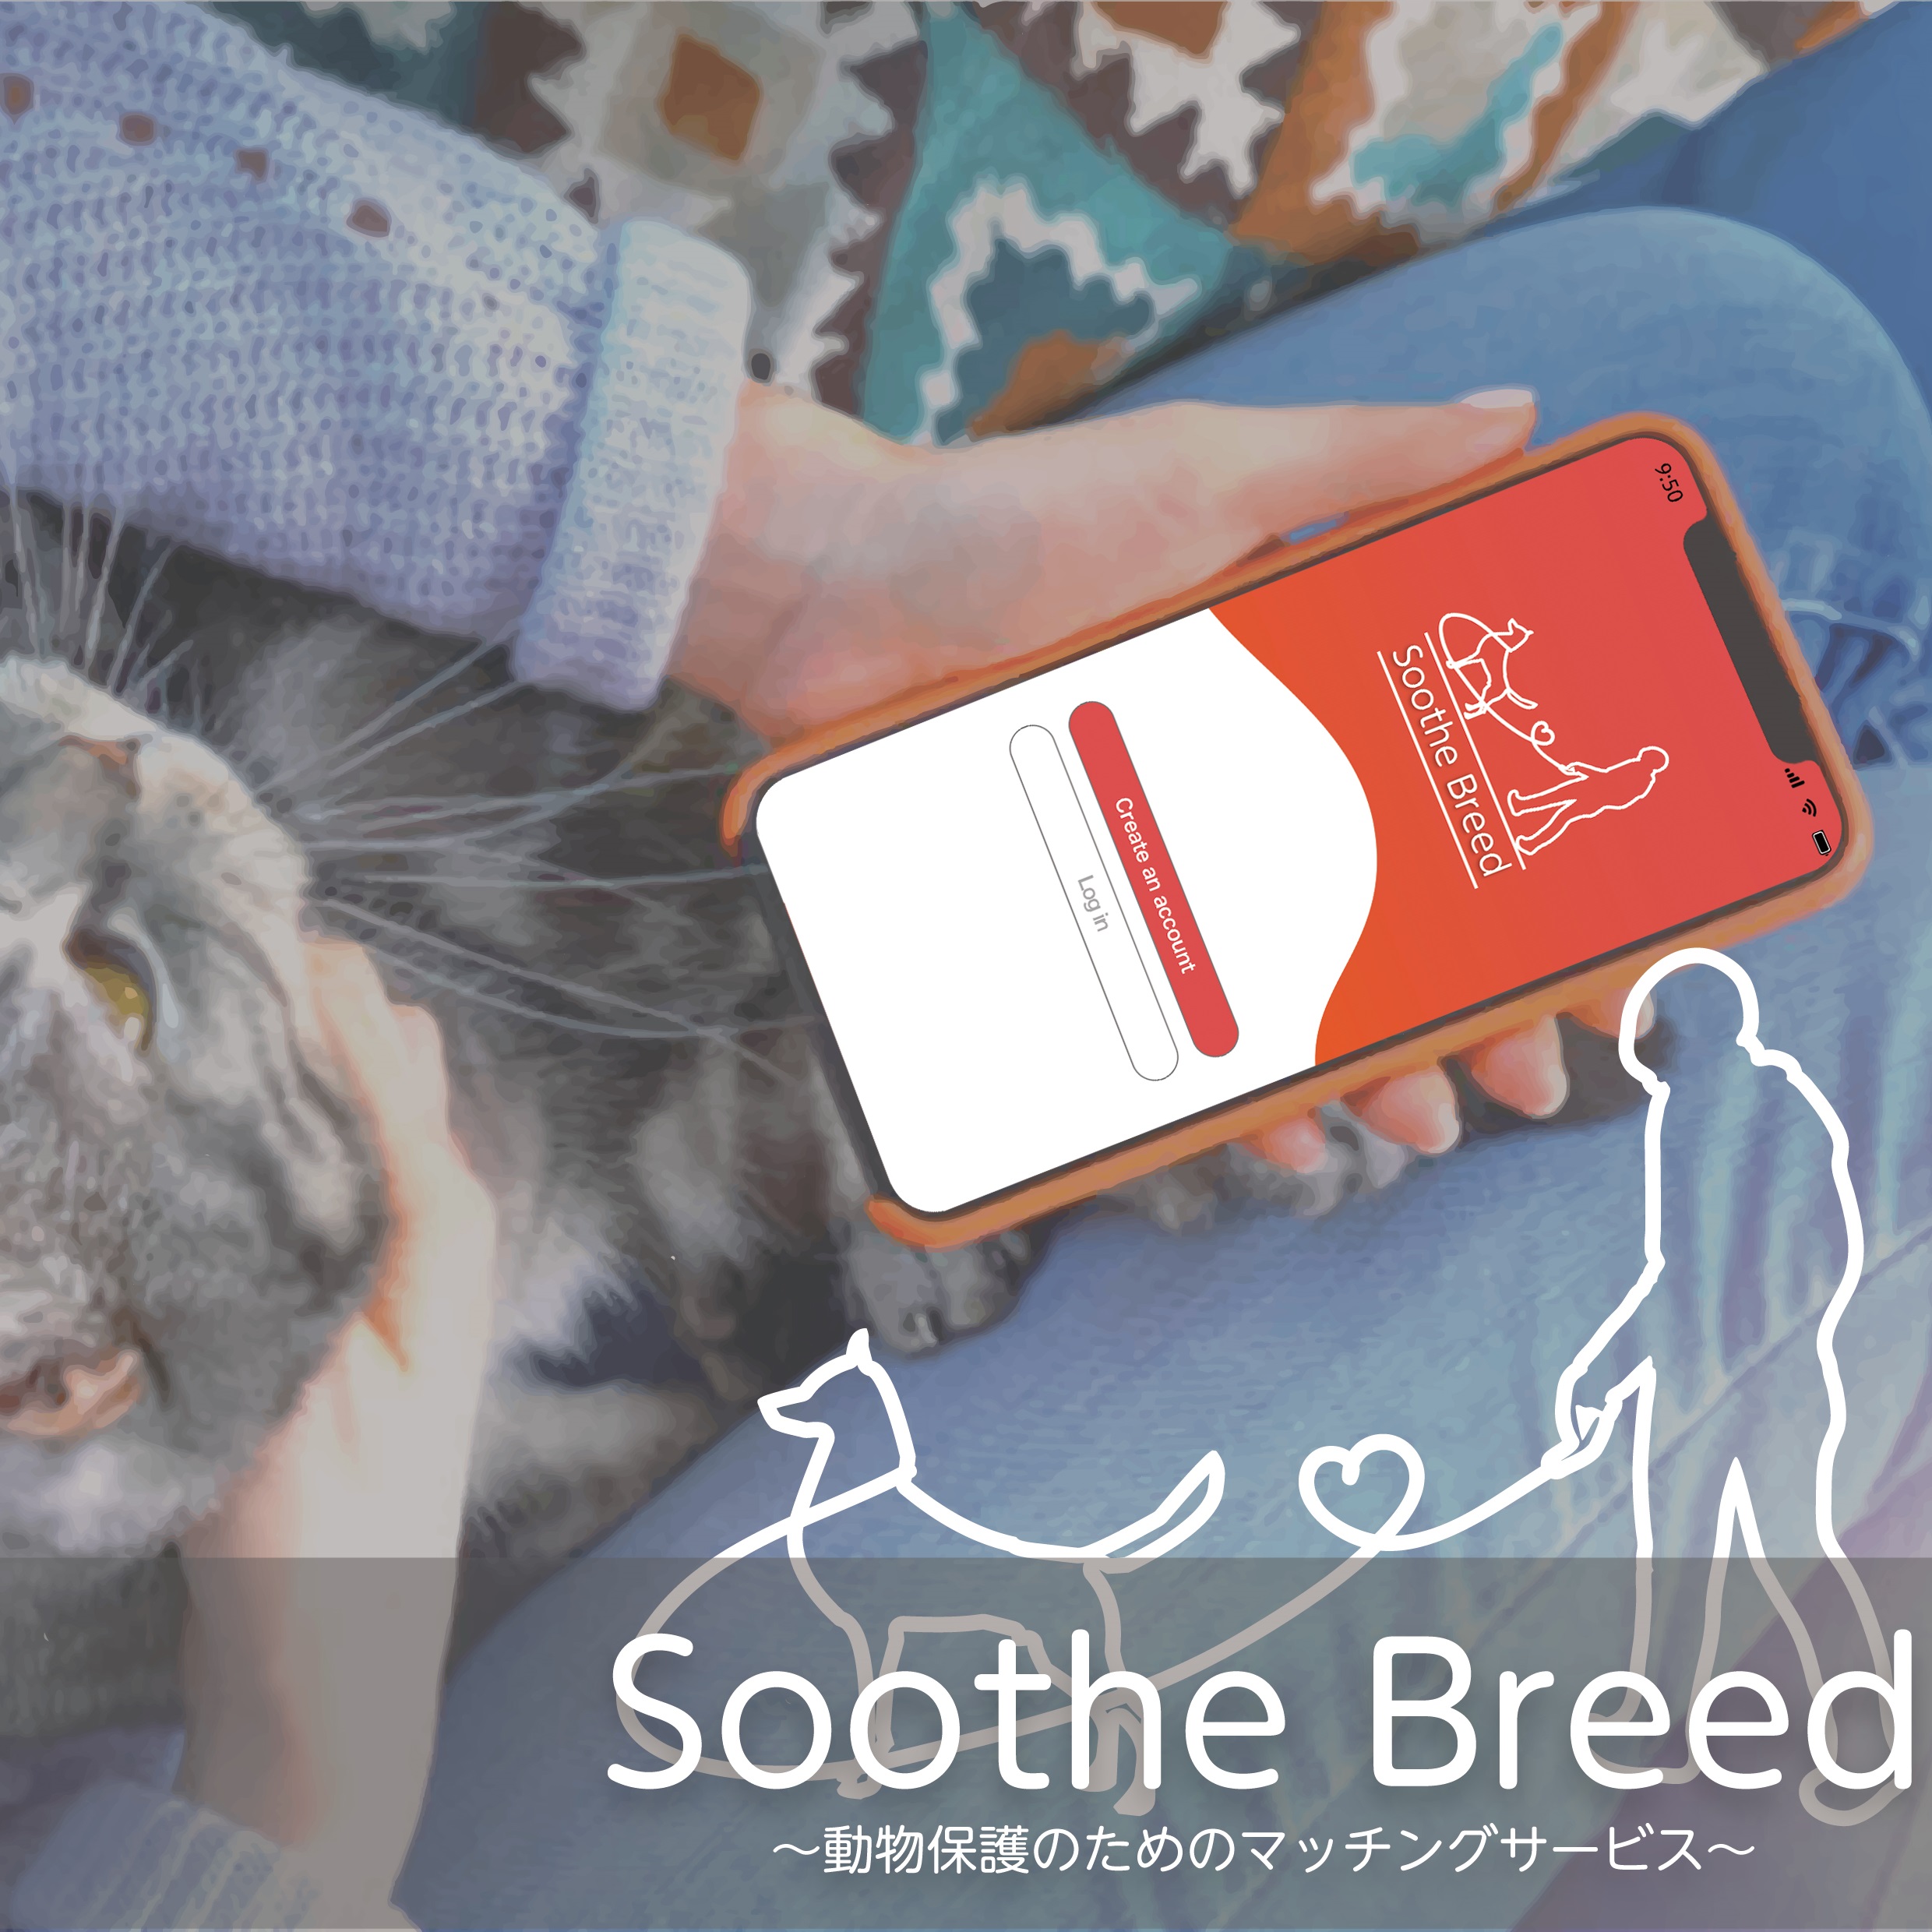 Sooth Breed